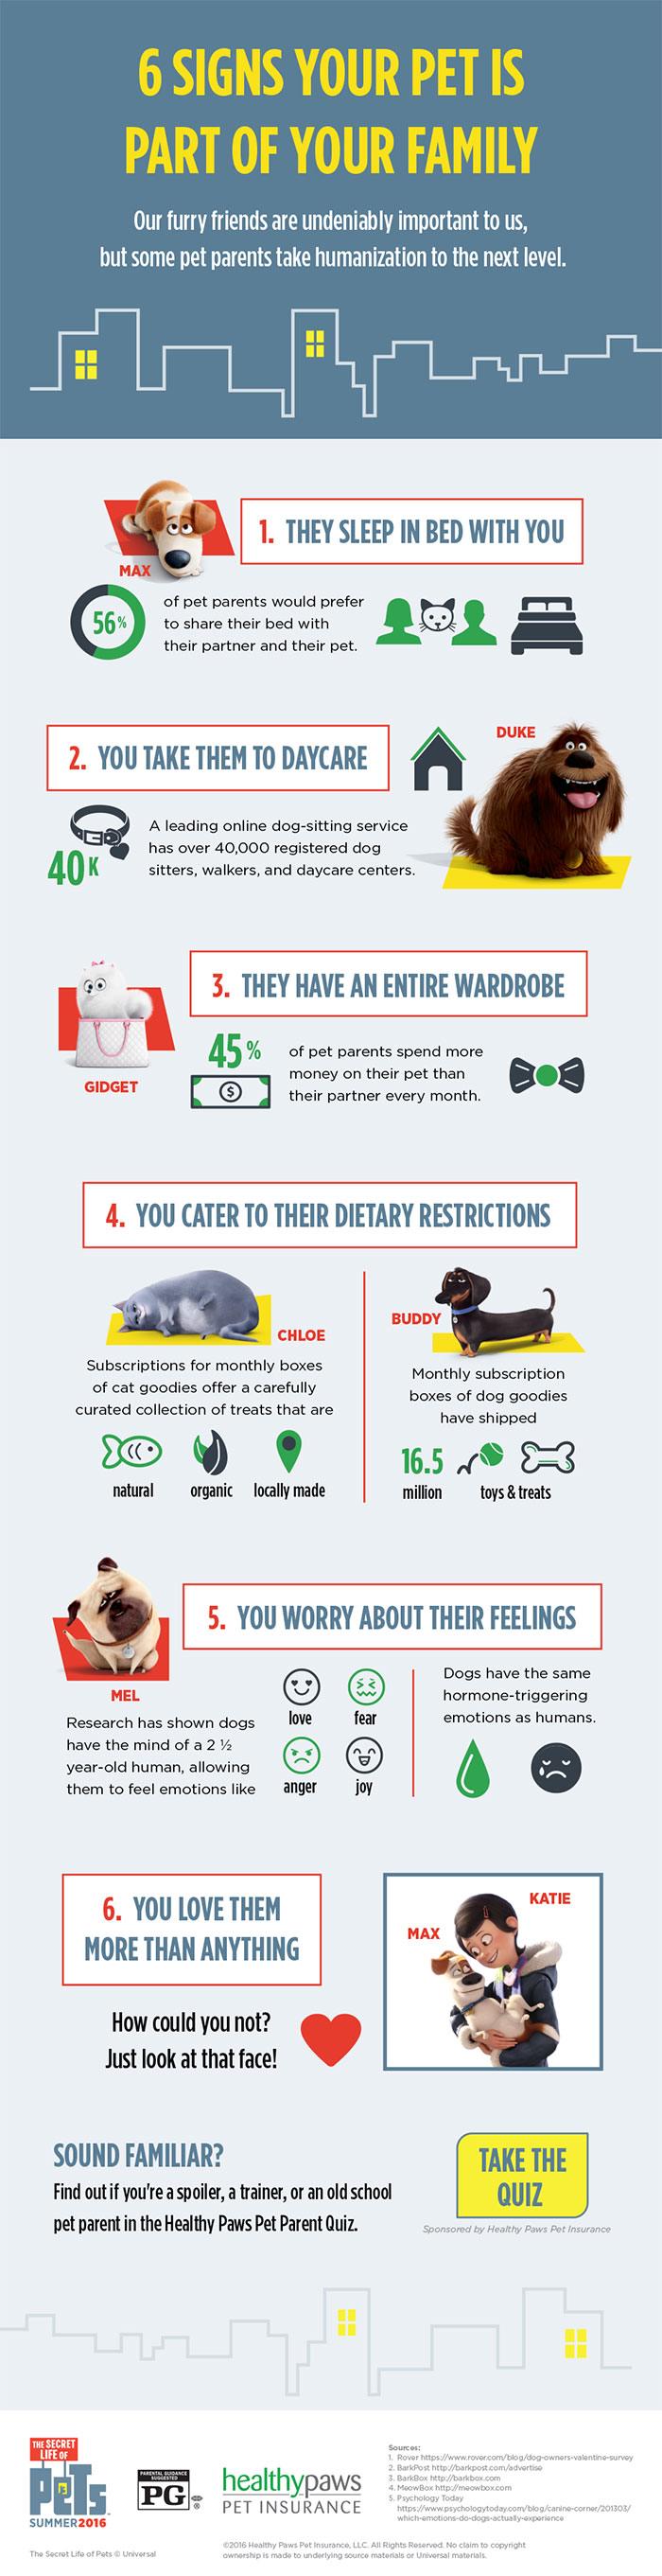 6-signs-your-pet-is-family-infographic